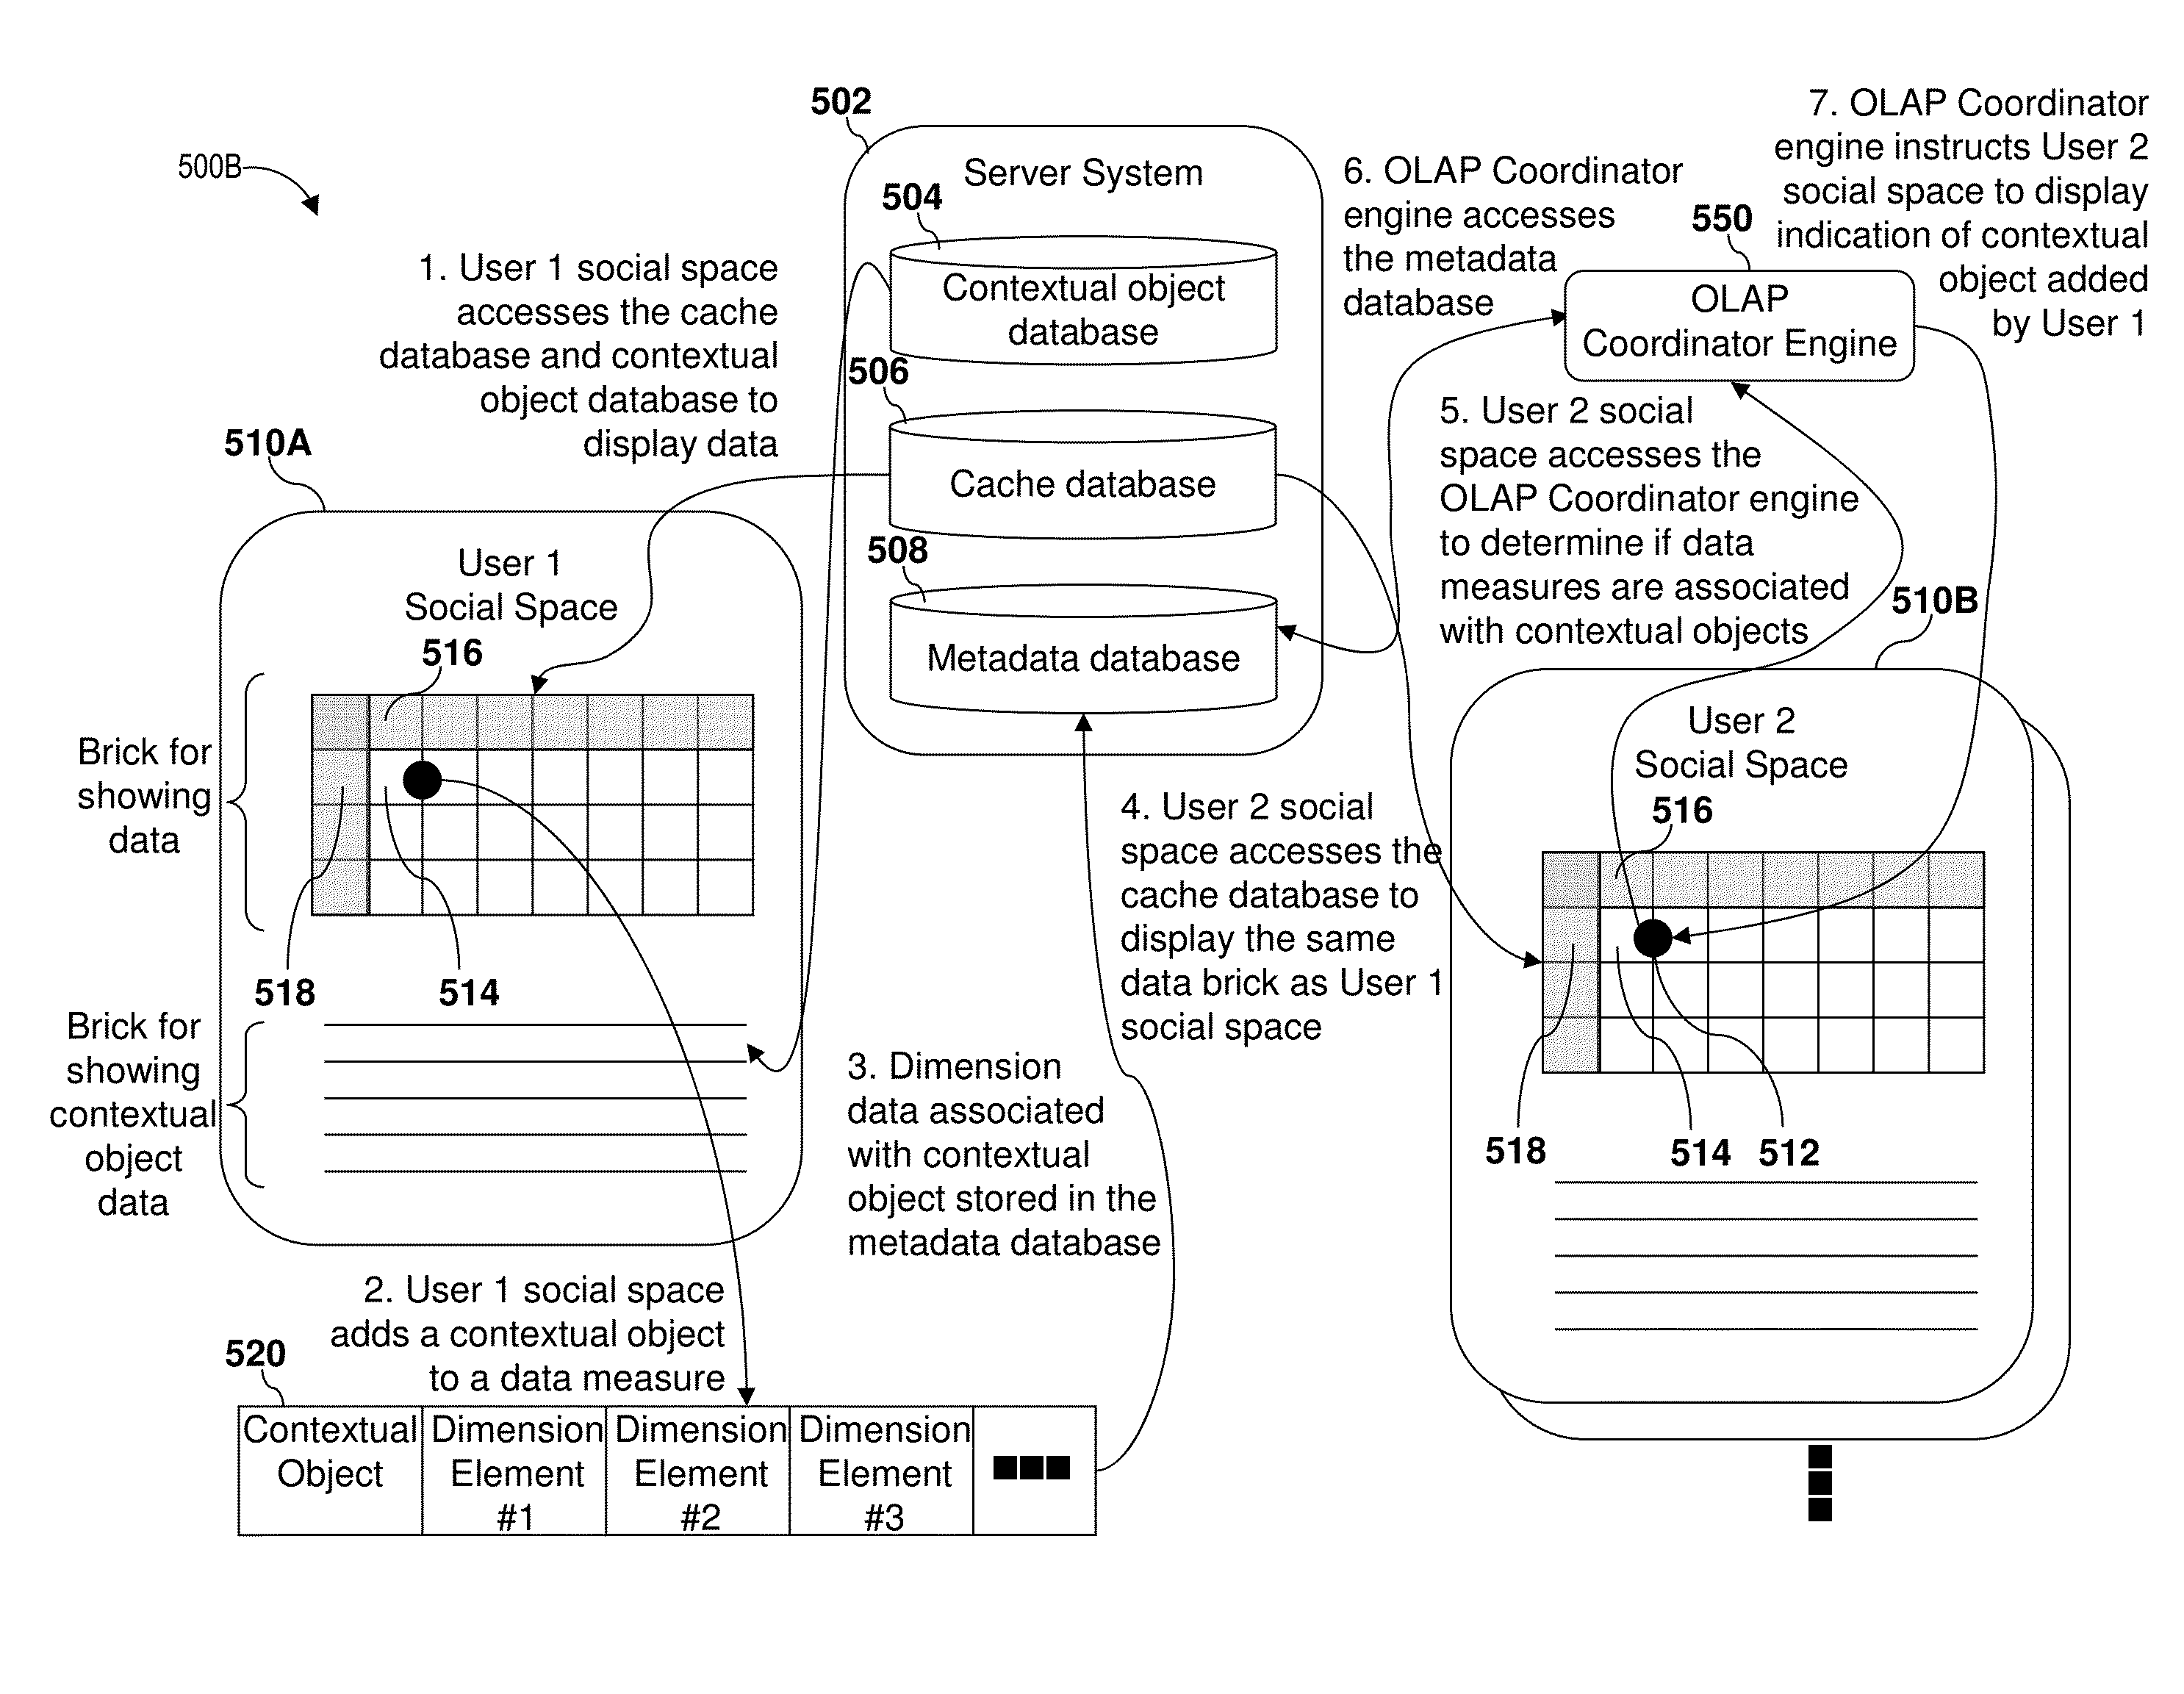 Systems, devices, and methods for generation of contextual objects mapped by dimensional data to data measures